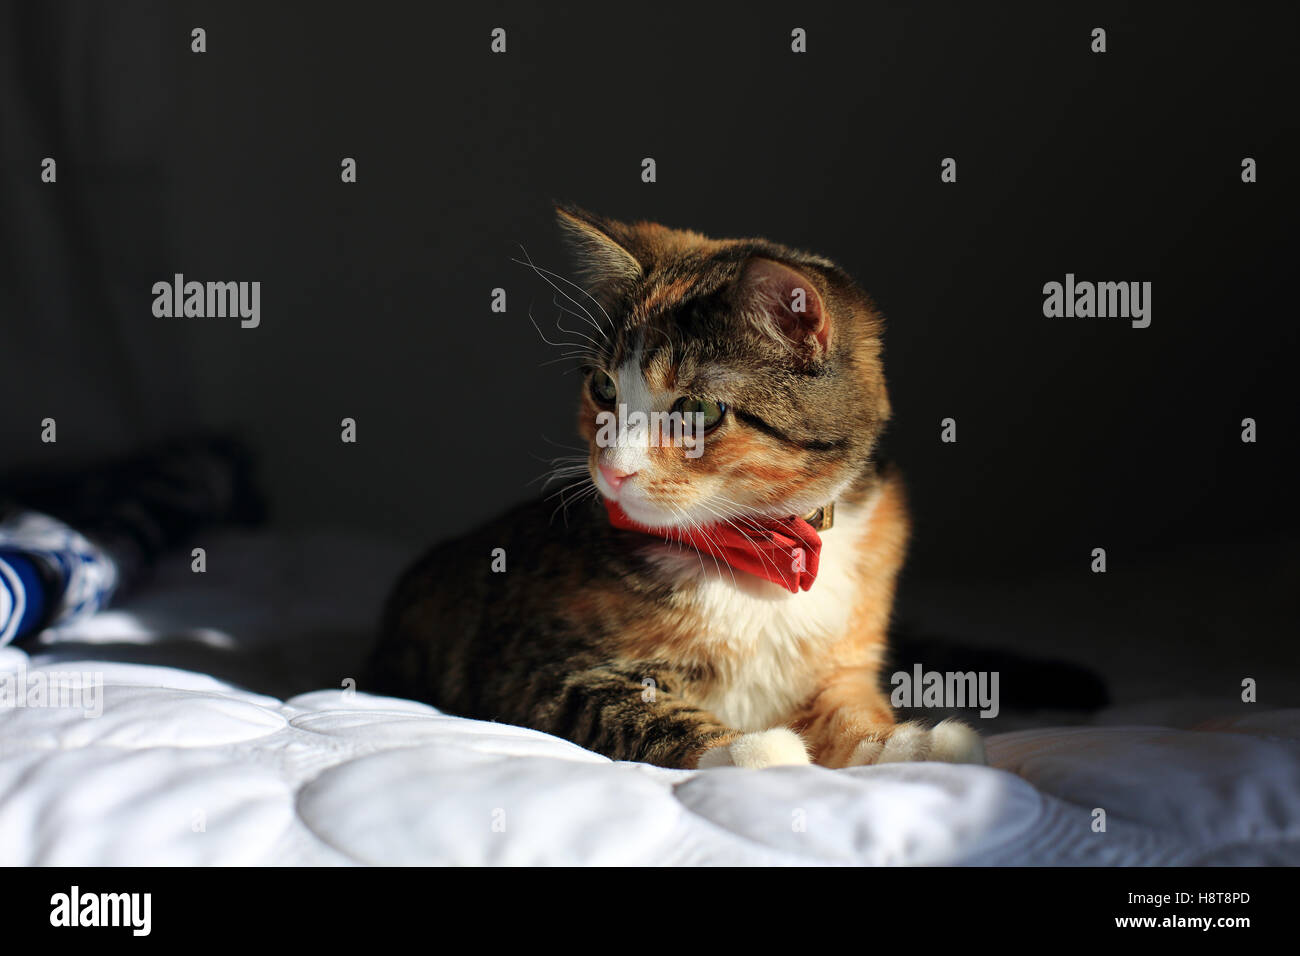 A orange, black and white speckled housecat wearing a bowtie rests on a bed in dramatic light. Stock Photo